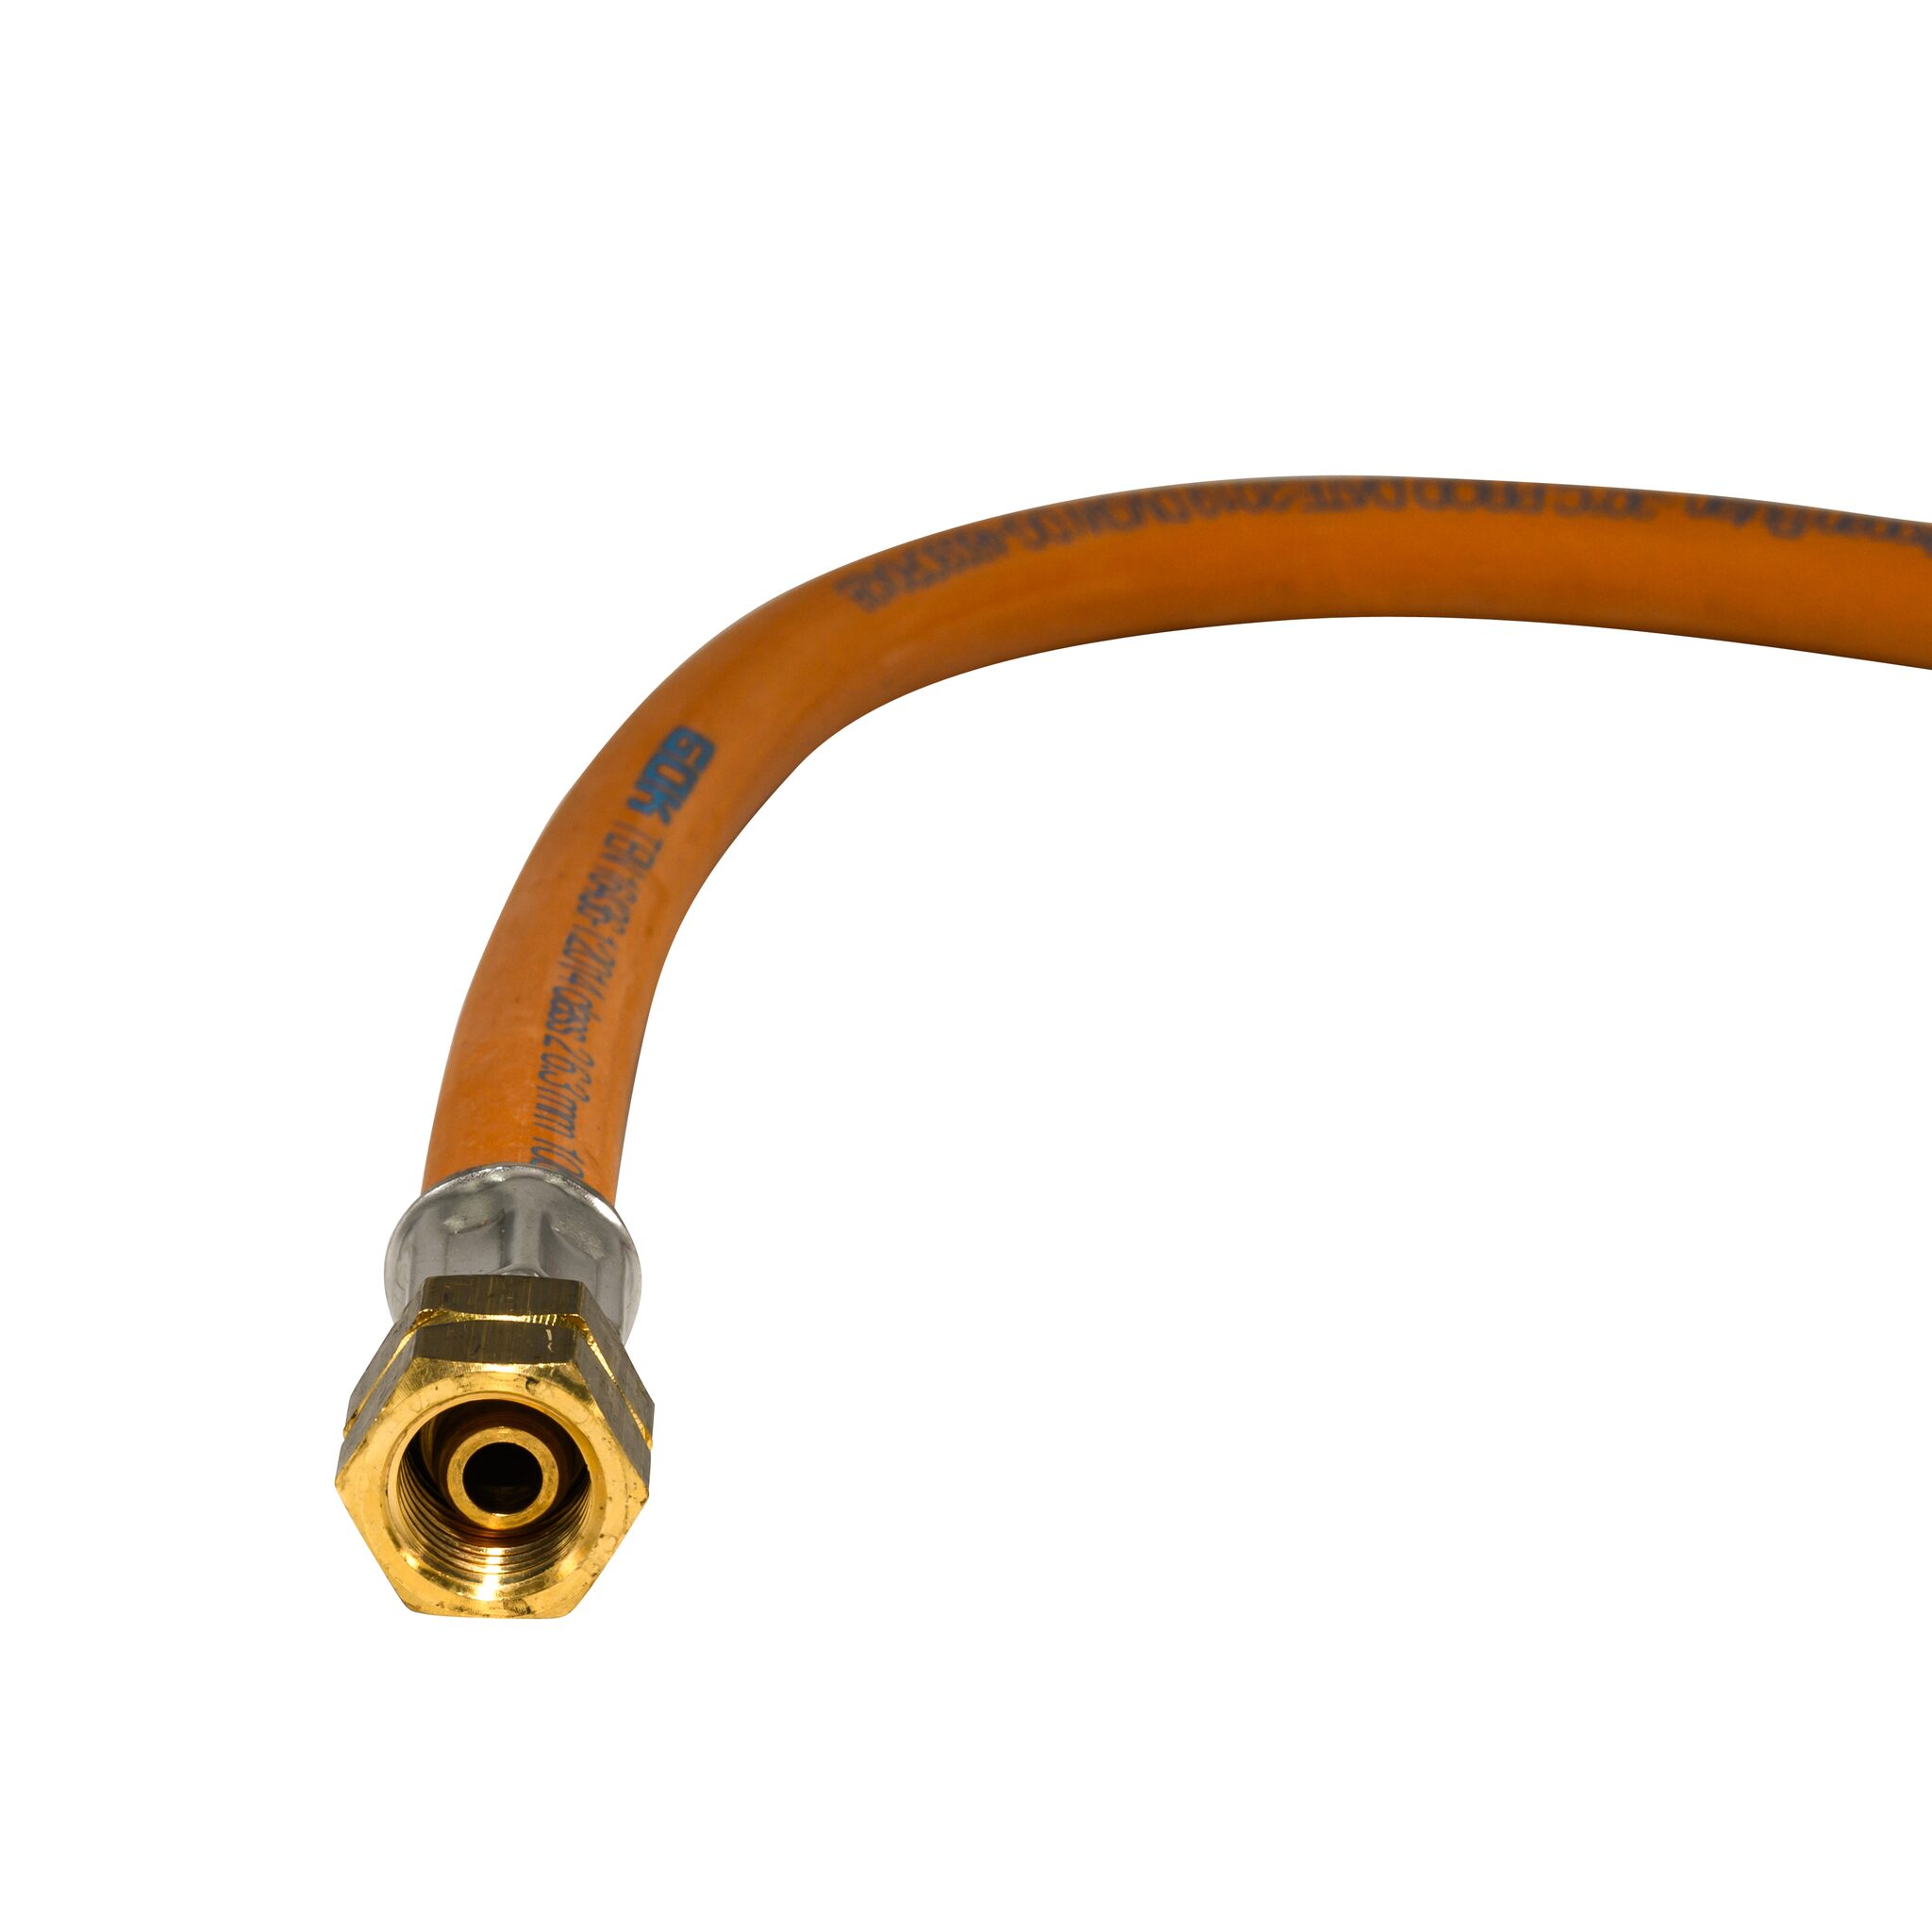 GOK gas connection hose pitch, 400 mm length